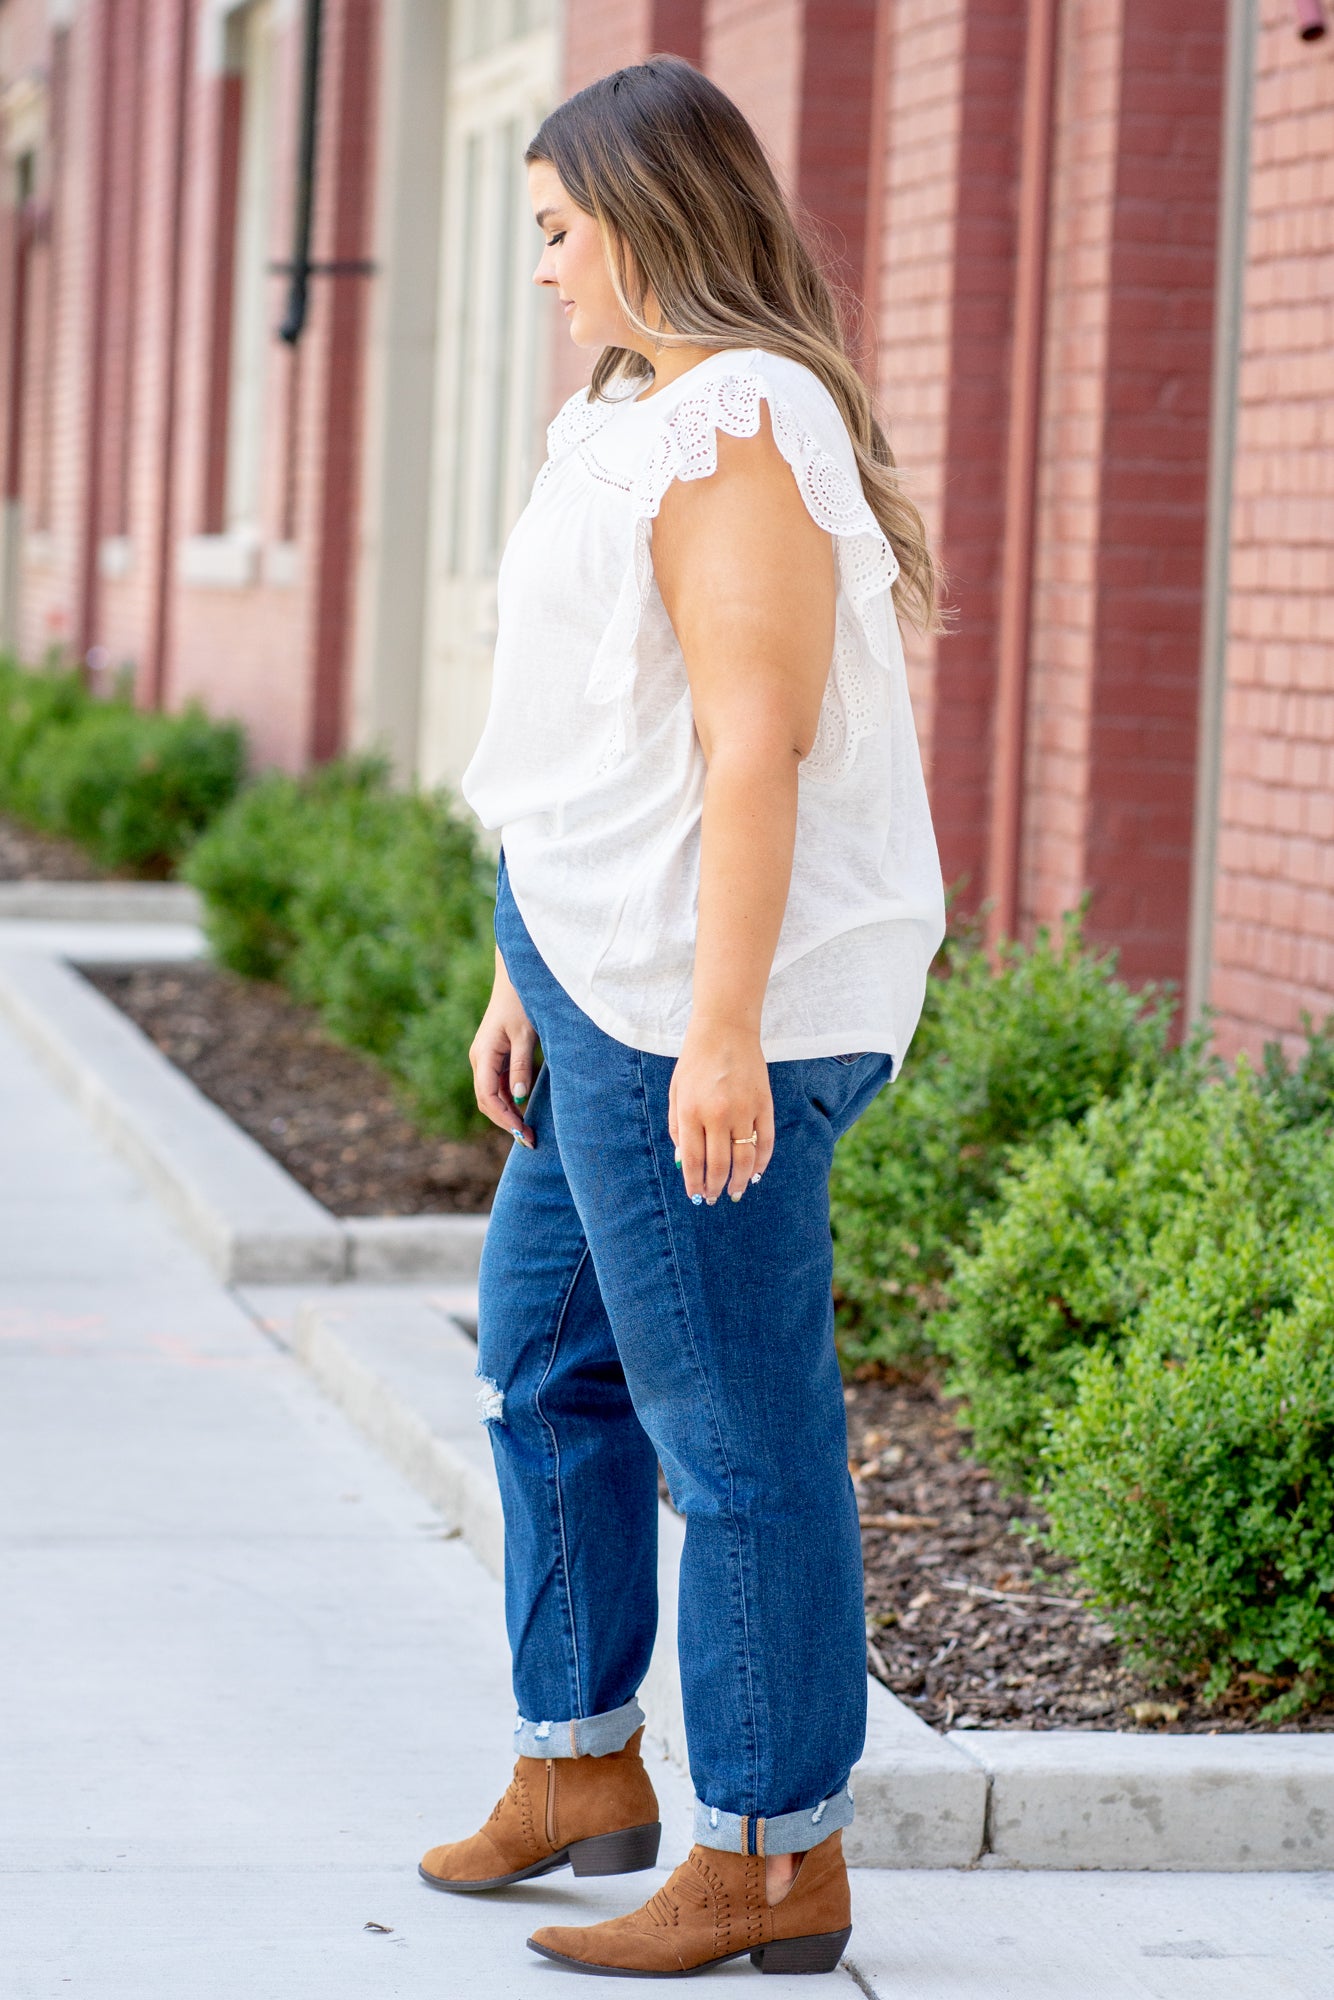 VERVET by Flying Monkey Jeans  These comfort stretch denim have a slouchy fit, distressed detail and relaxed legs. With a full length, these mom fit jeans will be your go to denim this fall.   Rise: High Rise, 13.5" Front Rise  Mom Fit 27" Inseam 90.5% COTTON 7.5% POLYESTER 2% SPANDEX Stitching: Classic  Fly: Zipper Fly  Style #: VT1196-PL  Contact us for any additional measurements or sizing..